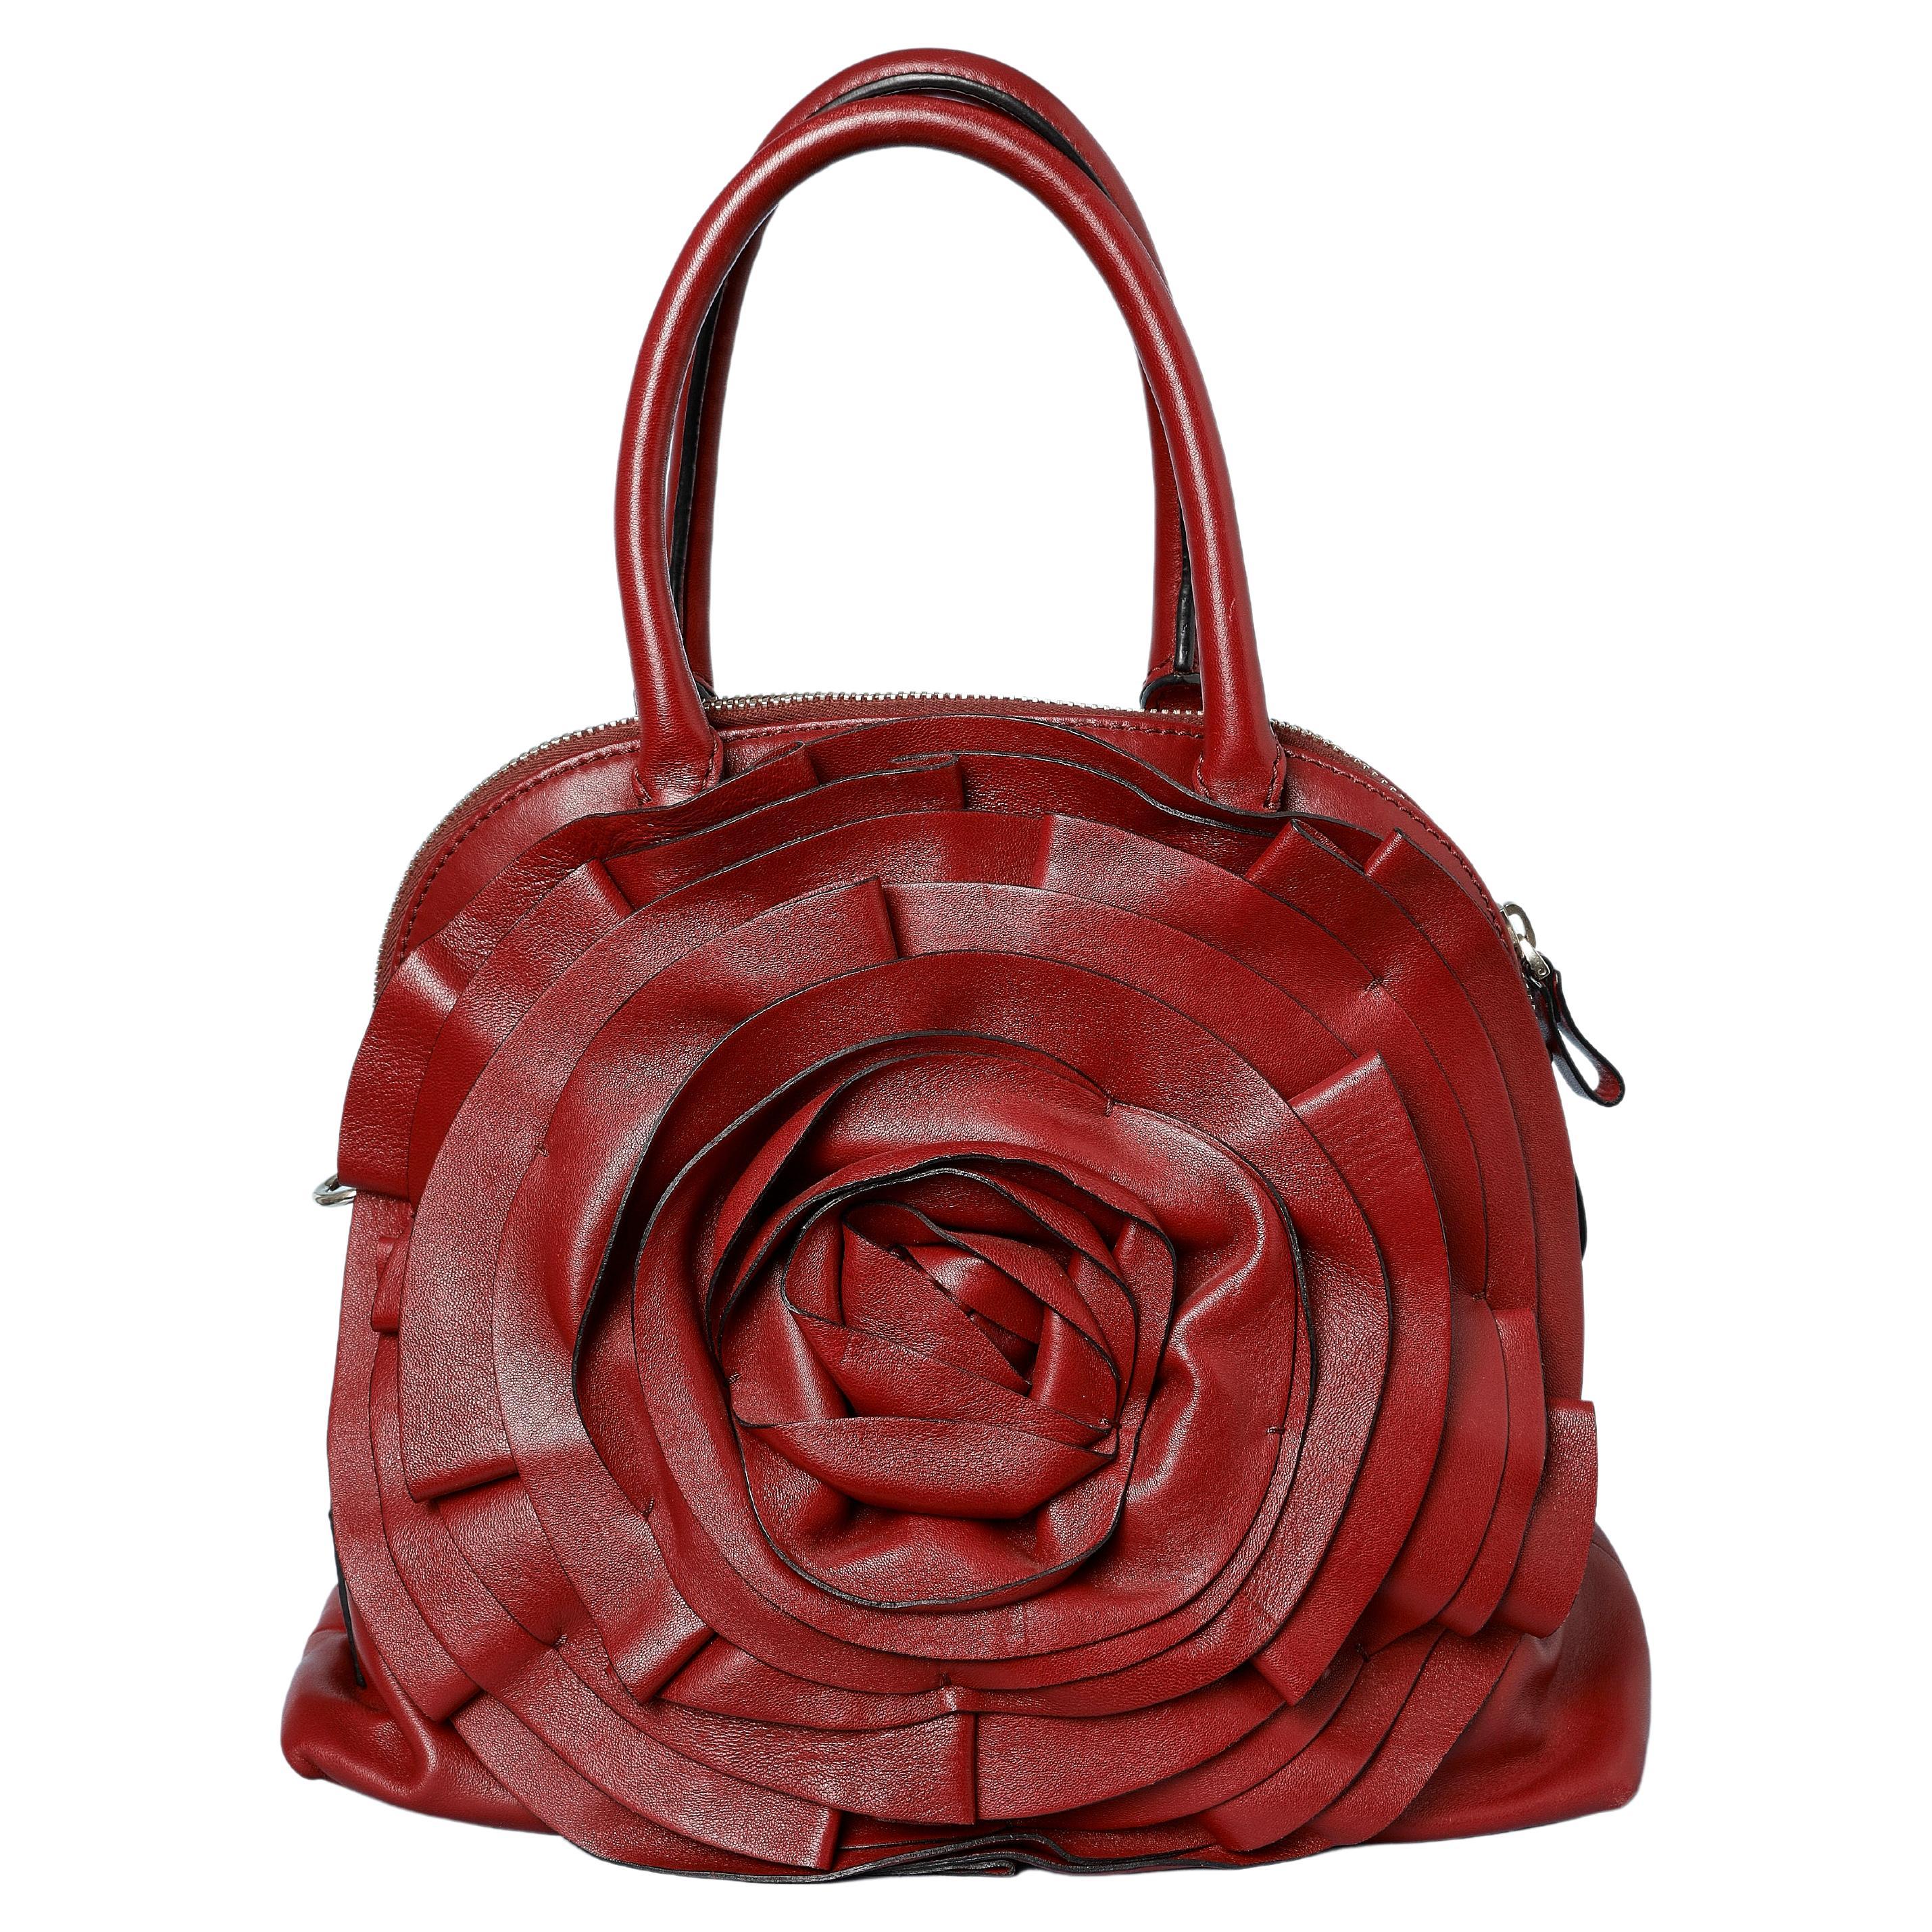 Burgundy hand leather bag with giant rose in leather Valentino